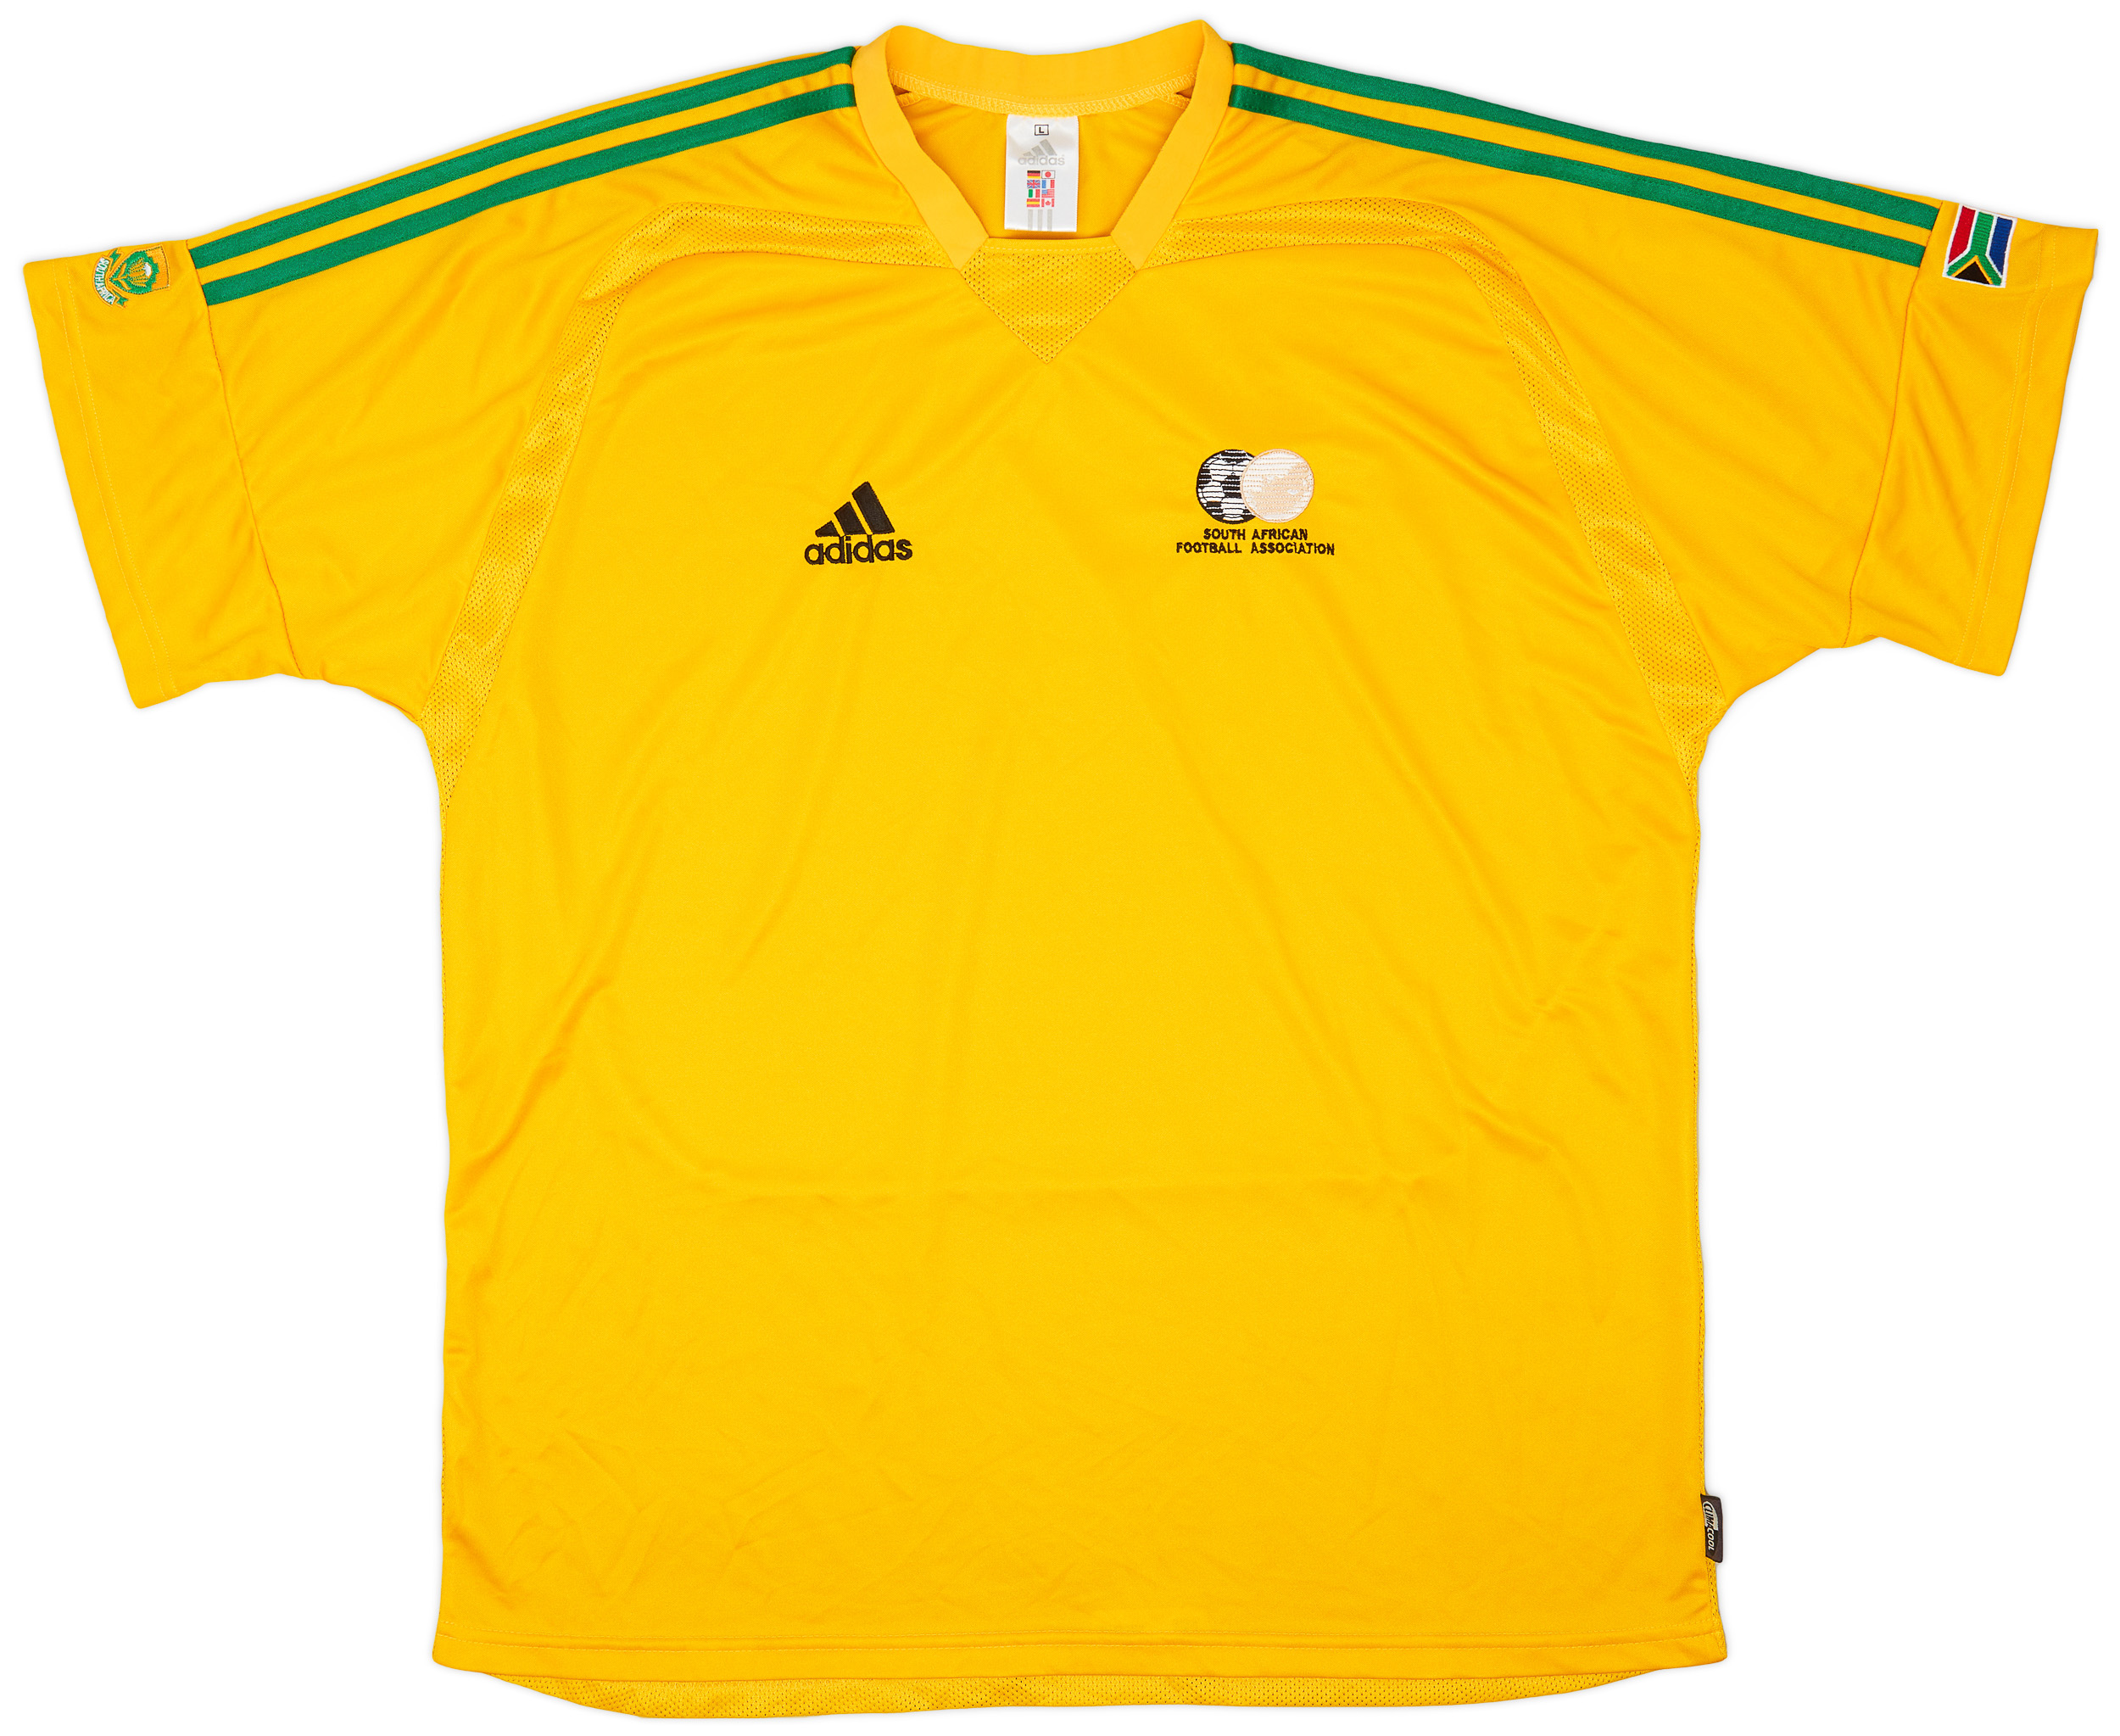 2004-06 South Africa Home Shirt - 10/10 - ()